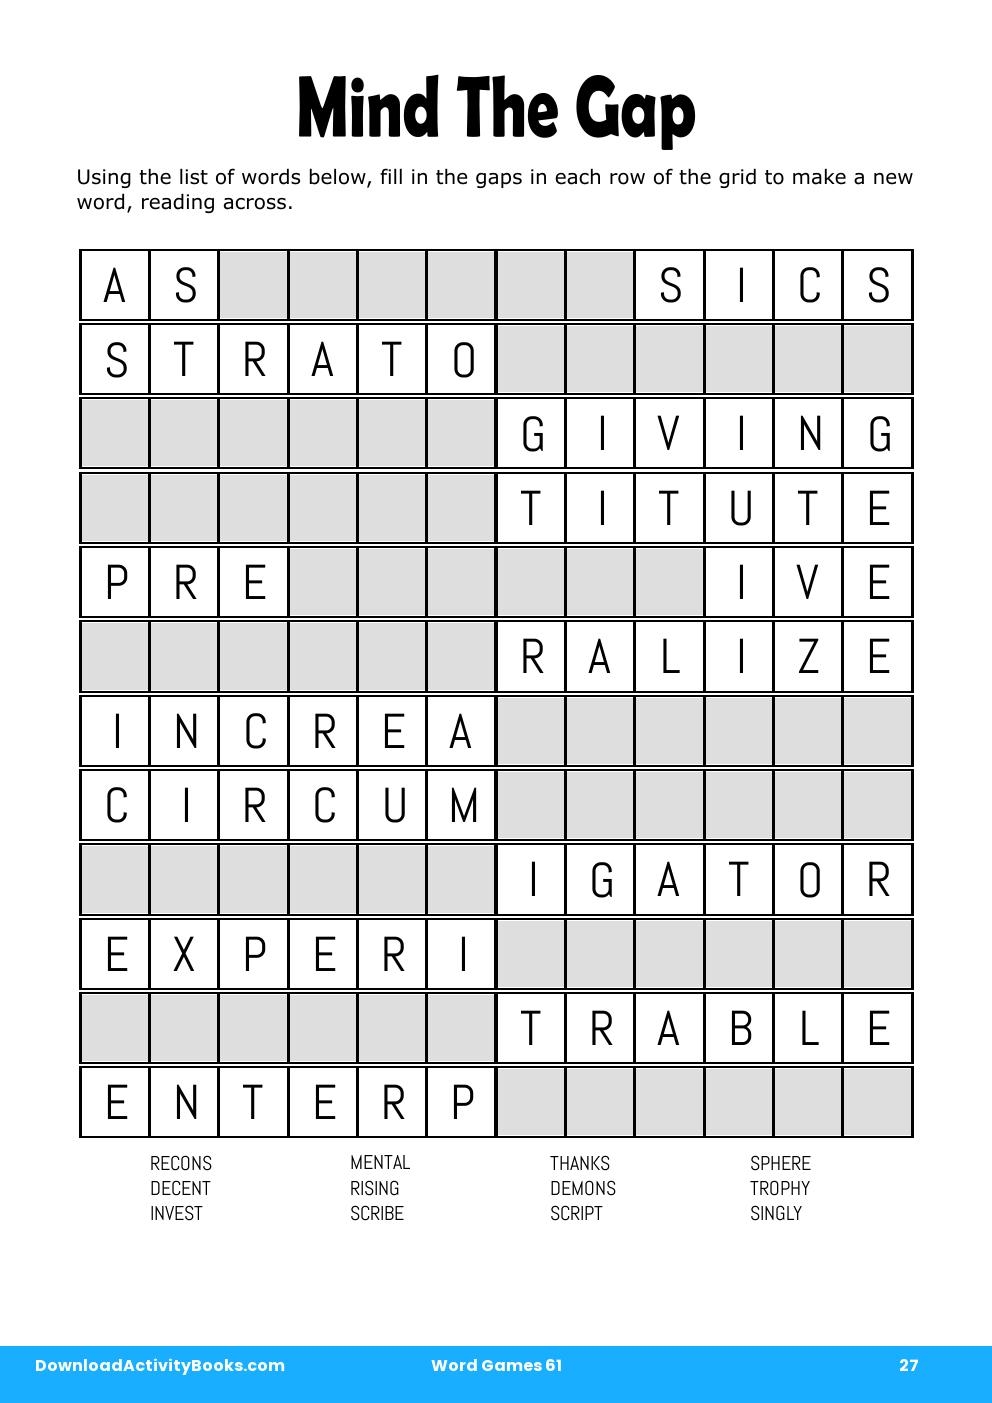 Mind The Gap in Word Games 61